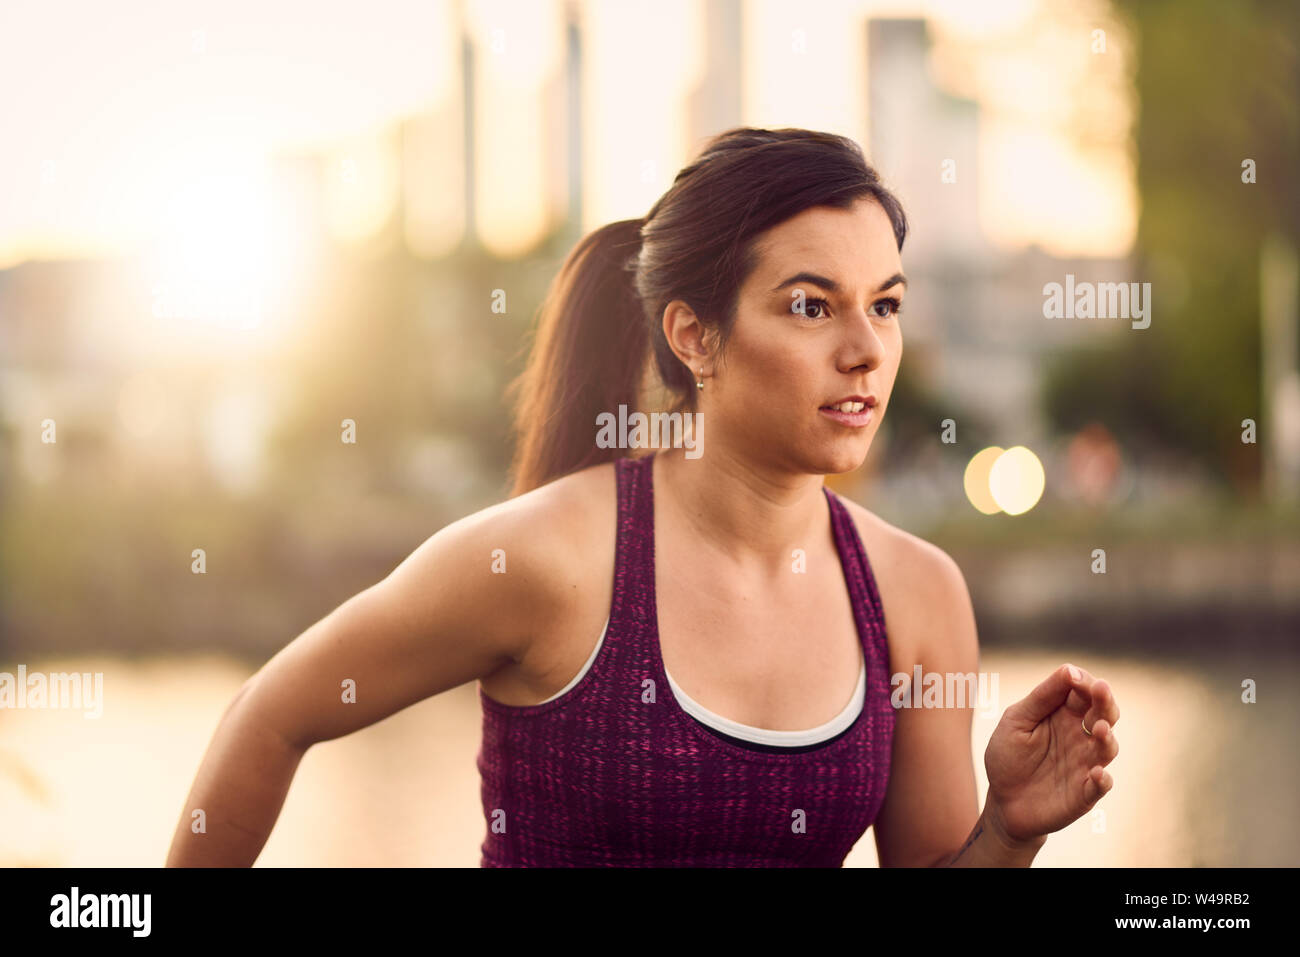 Portrait of active millenial woman jogging at dusk with an urban cityscape and sunset in the background Stock Photo